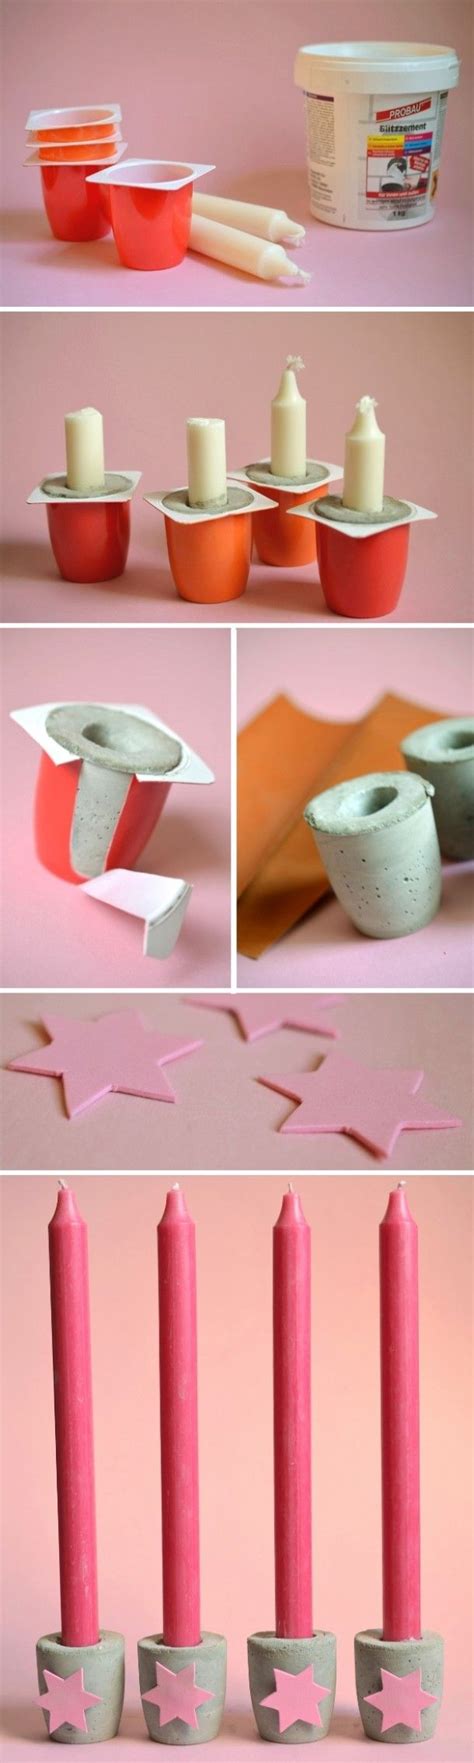 Top 32 DIY Concrete And Cement Projects For The Crafty Side Of You